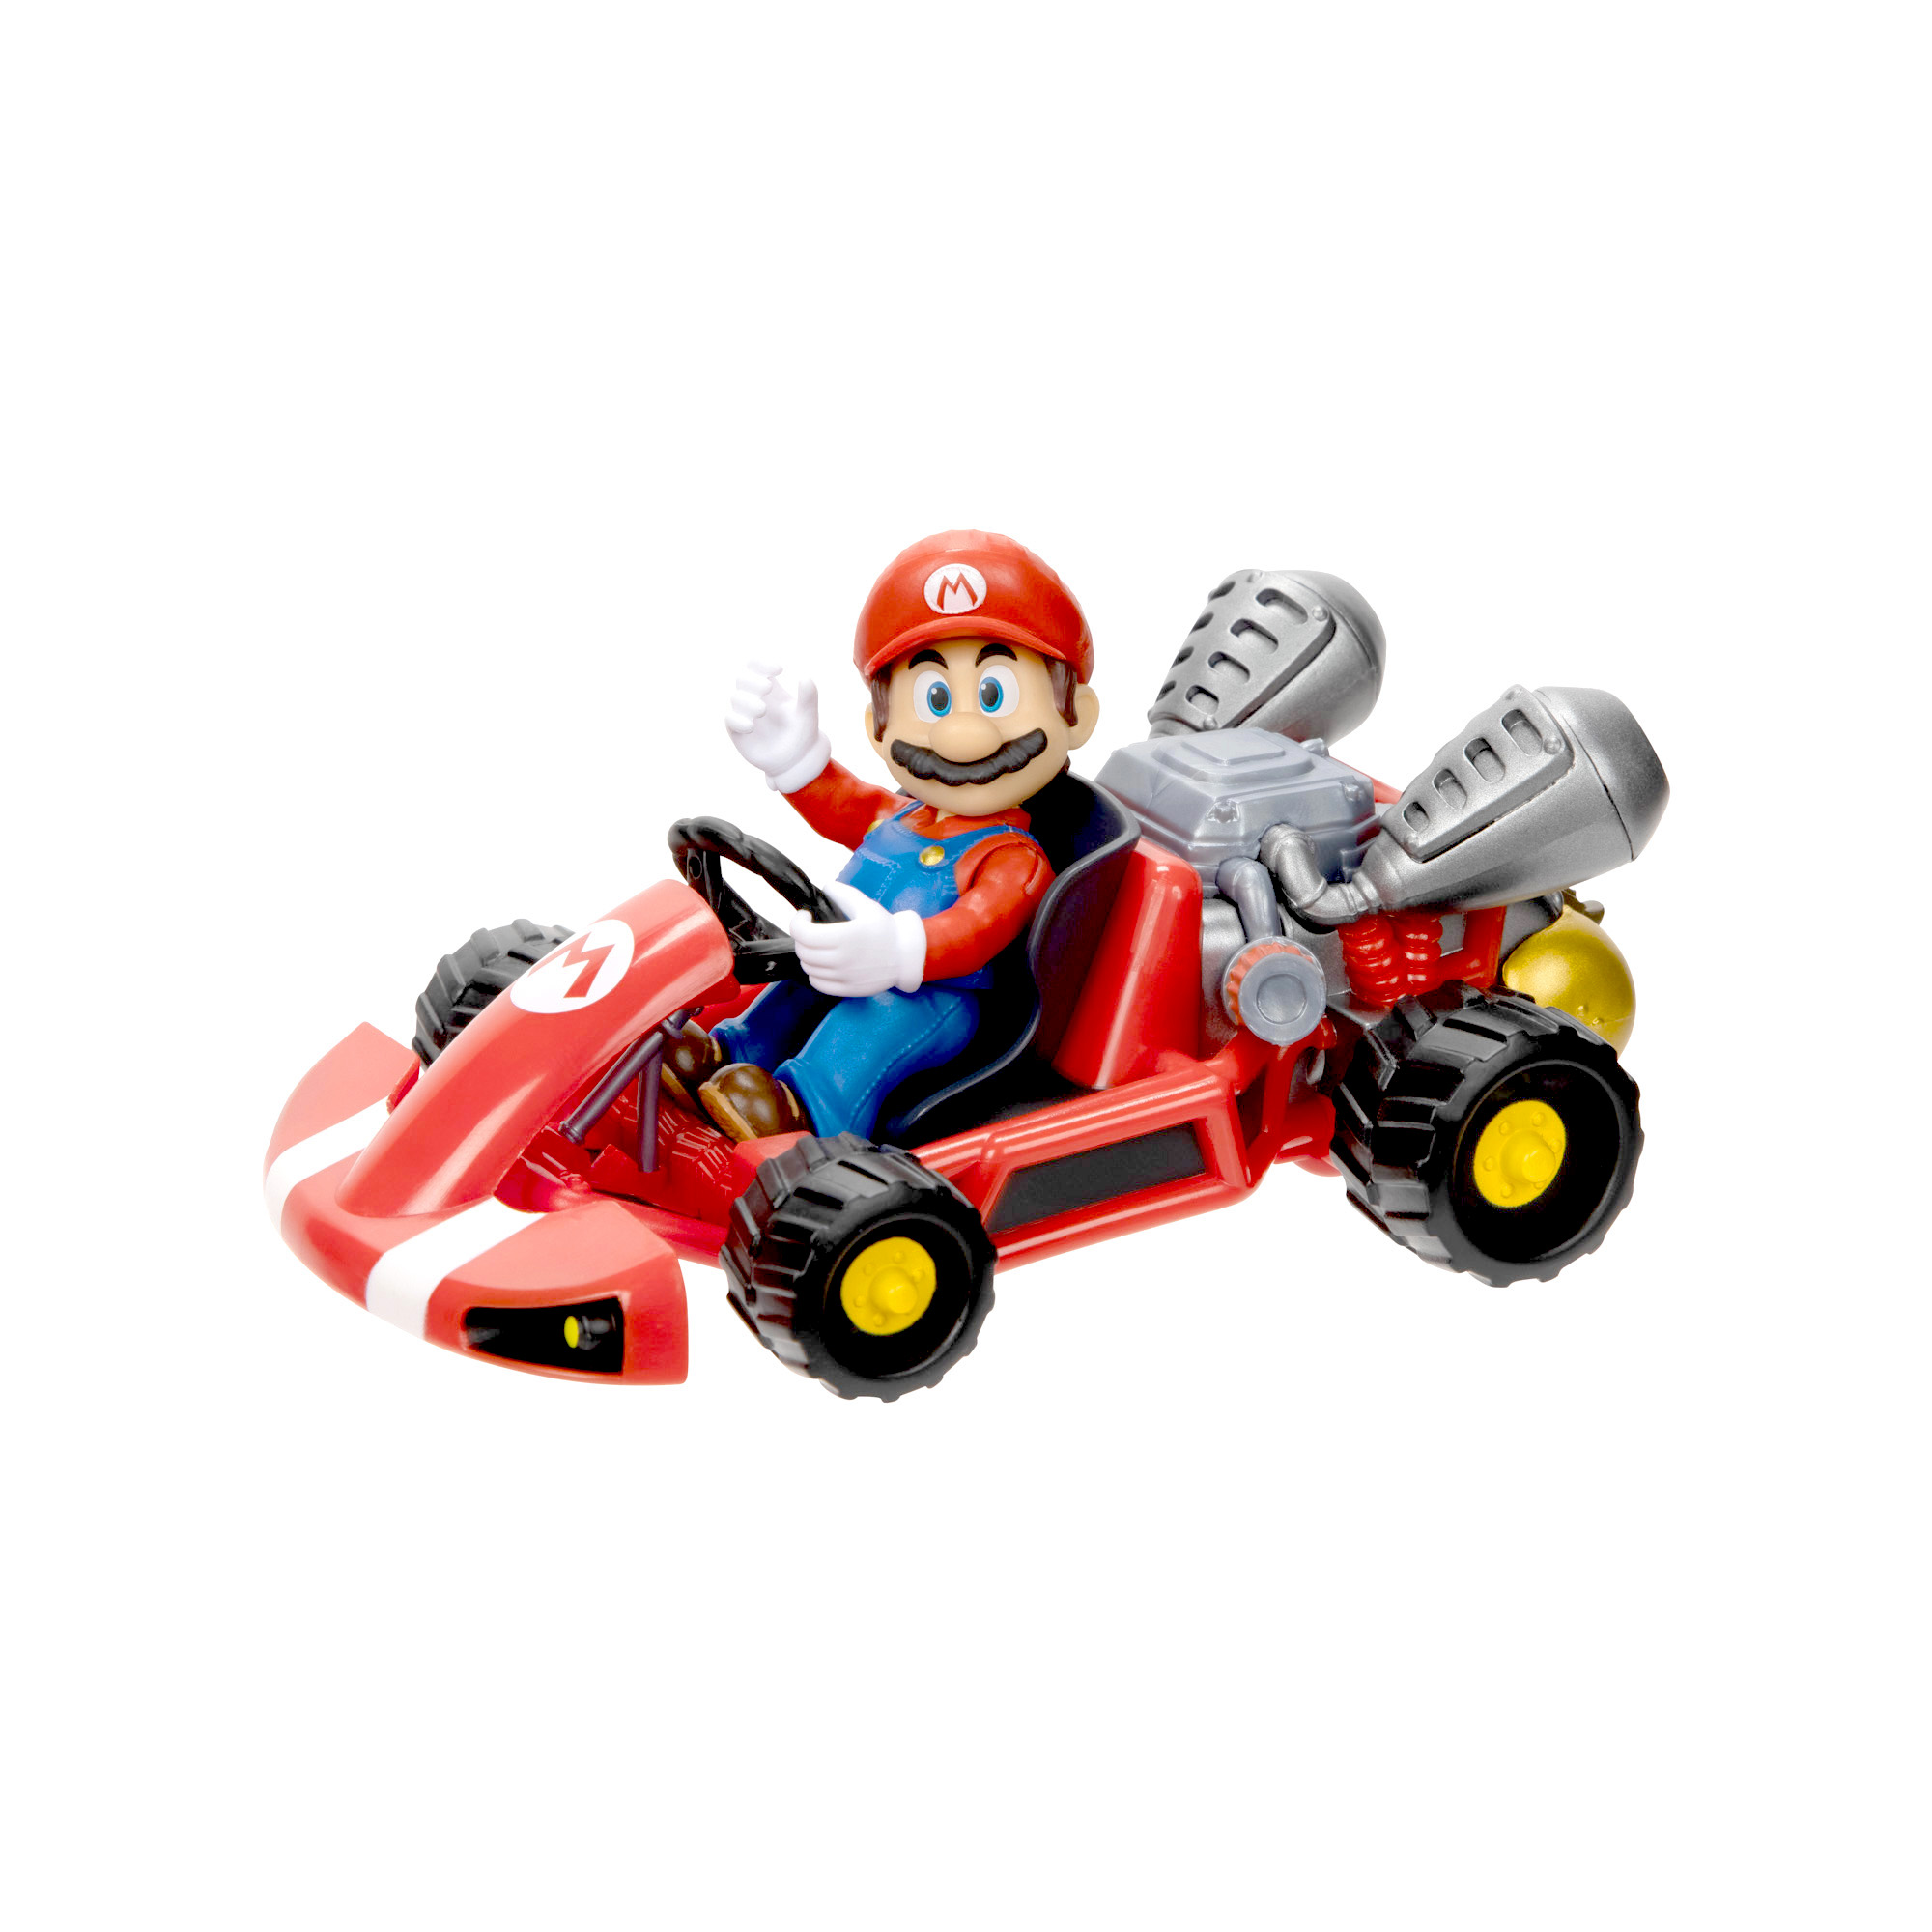 Super Mario Mini Figures Collection Sets, Multiple Styles, Karts